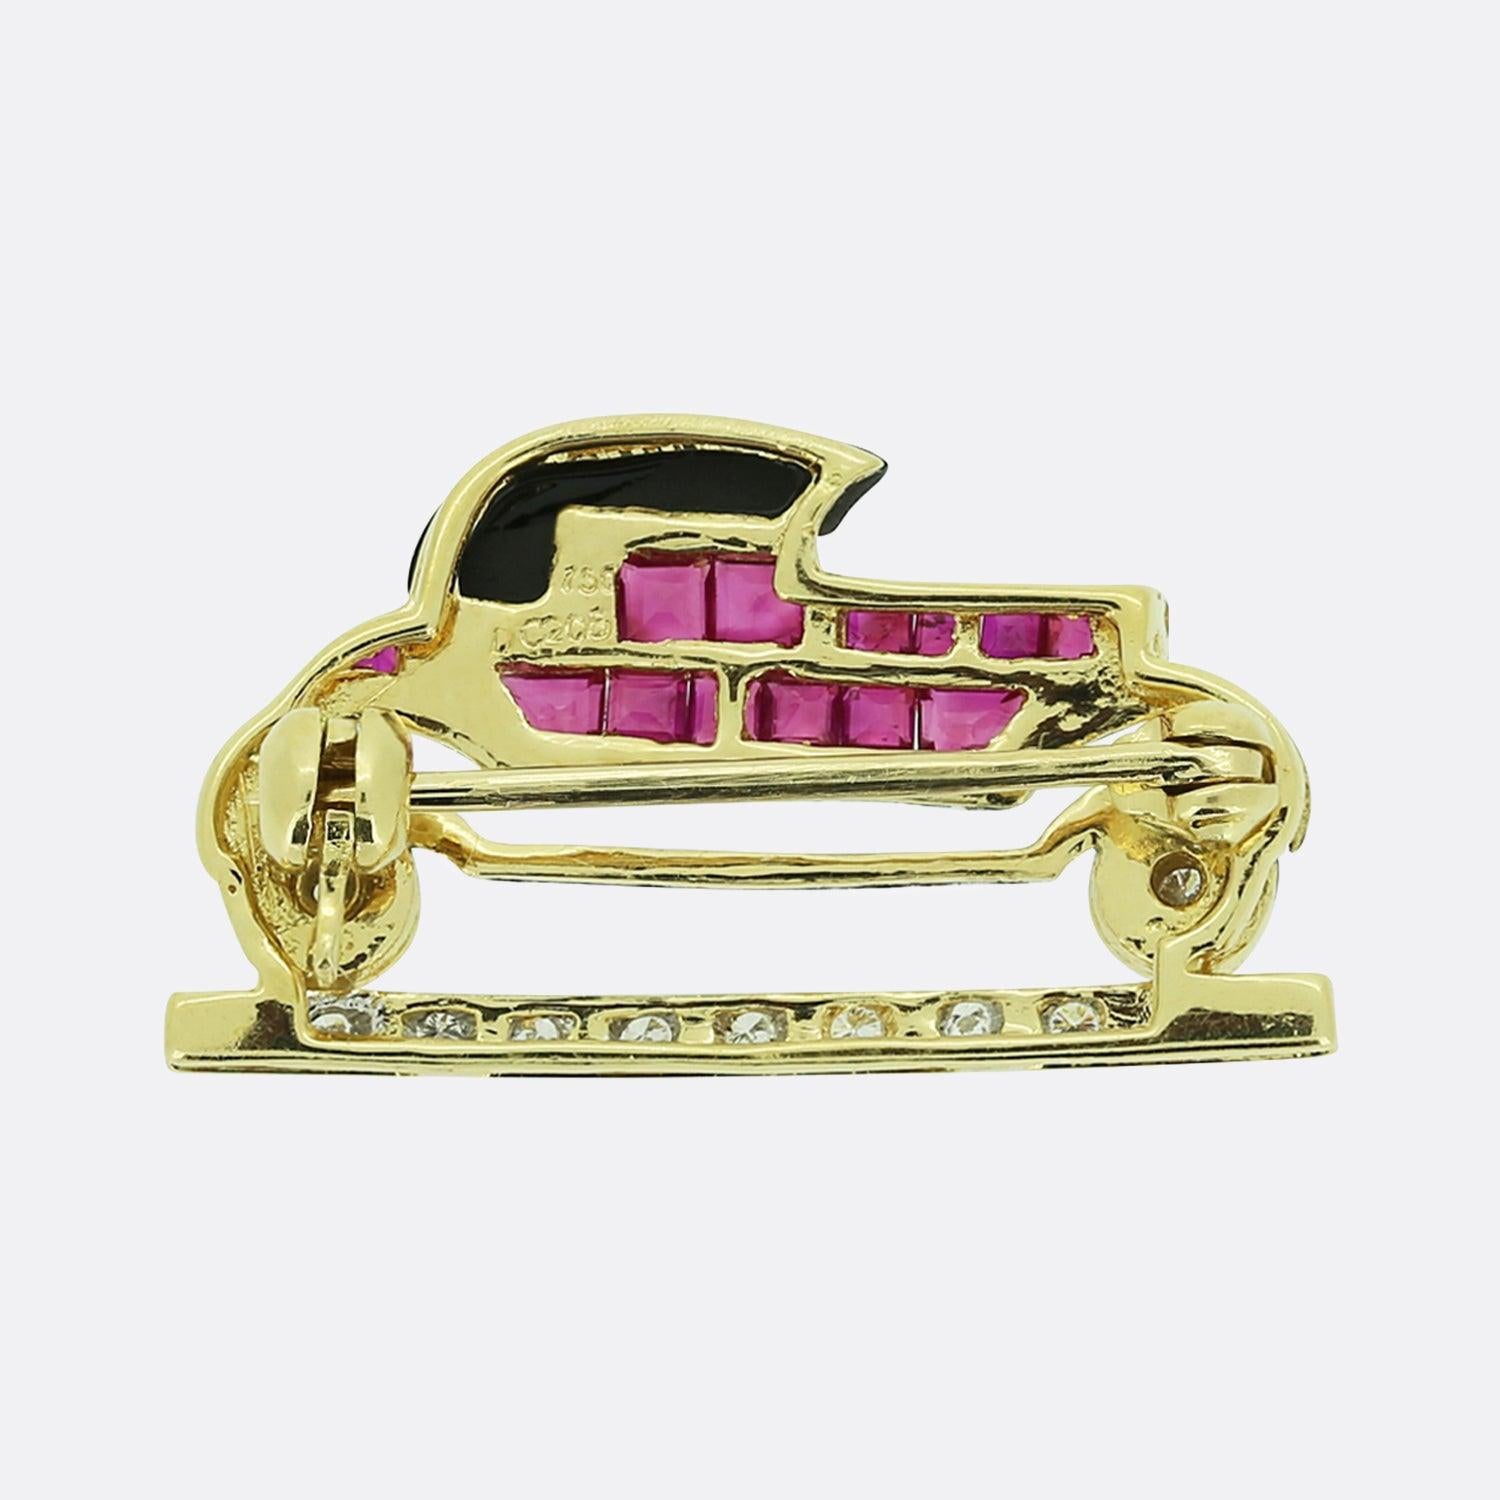 Here we have a superb vintage brooch. The piece has been crafted from 18ct yellow gold into the shape of a classic car from the 1930s. Automobiles of the 1930s exhibited many notable features; whilst being longer and lower in body design, these